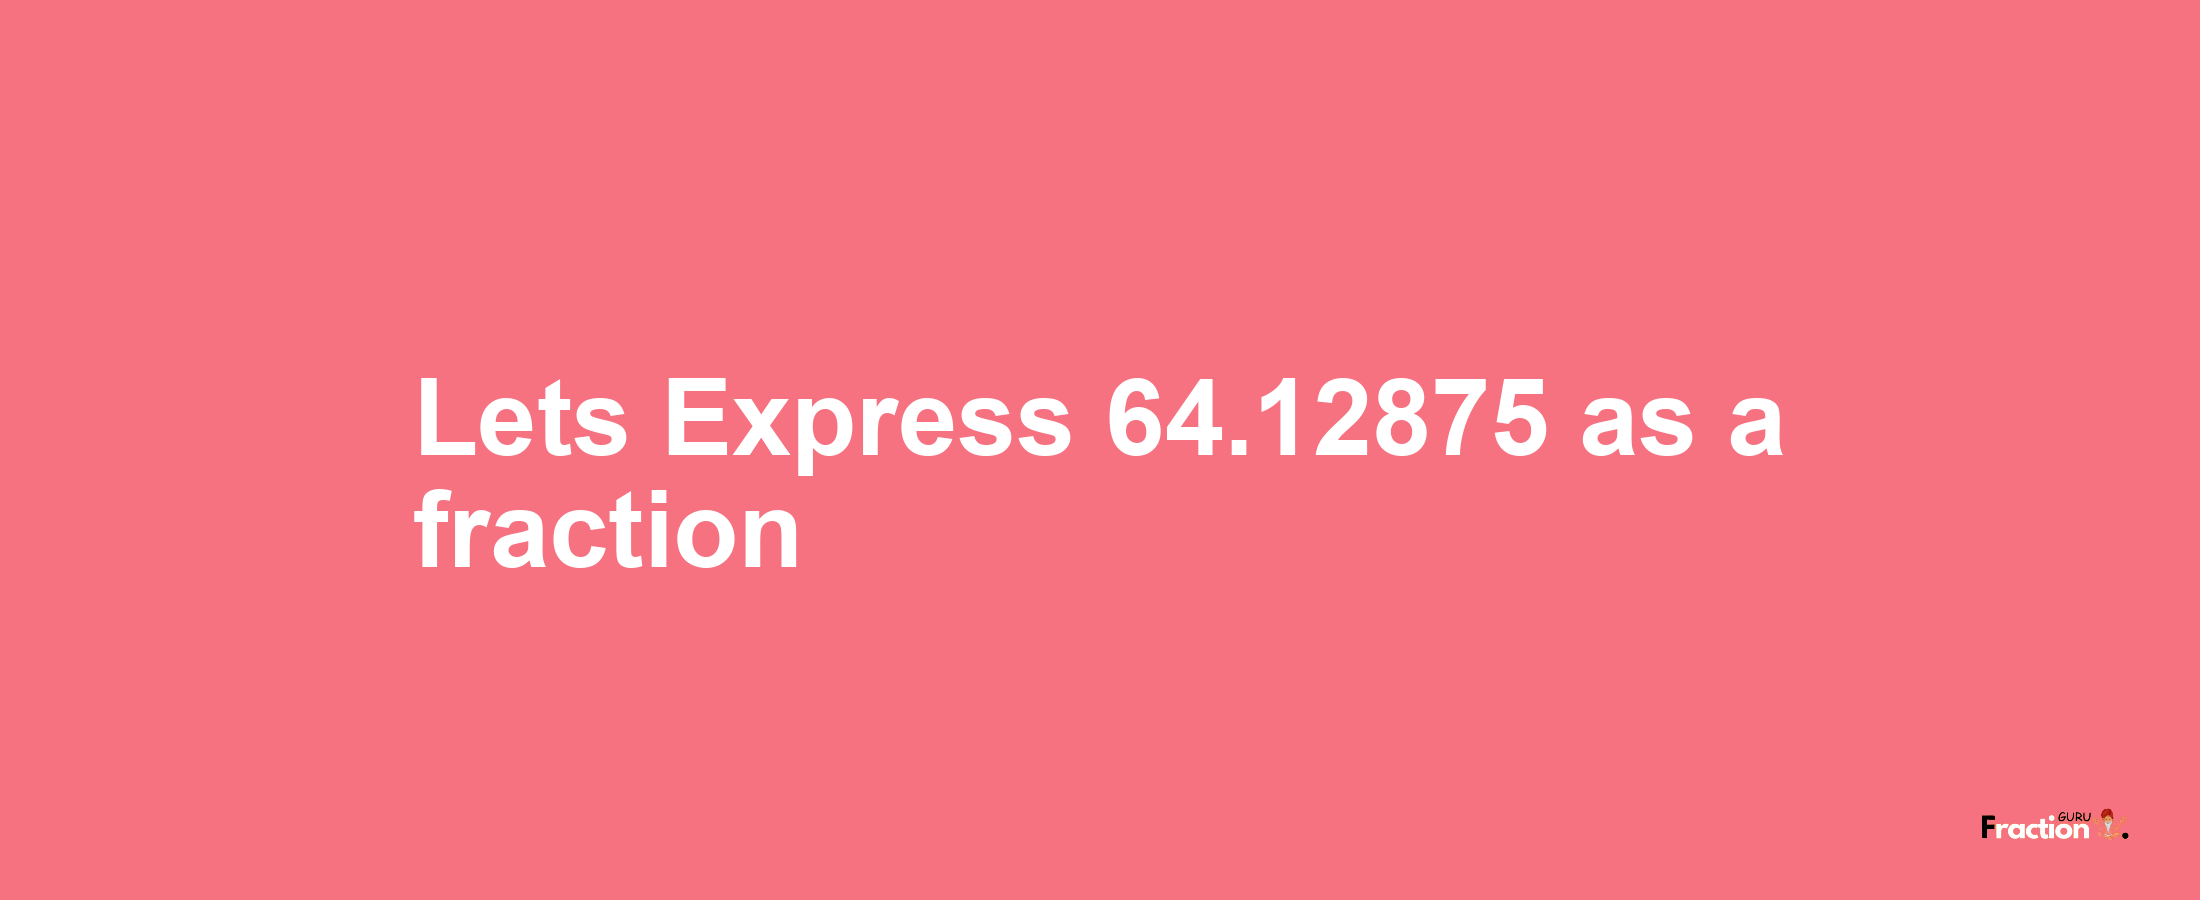 Lets Express 64.12875 as afraction